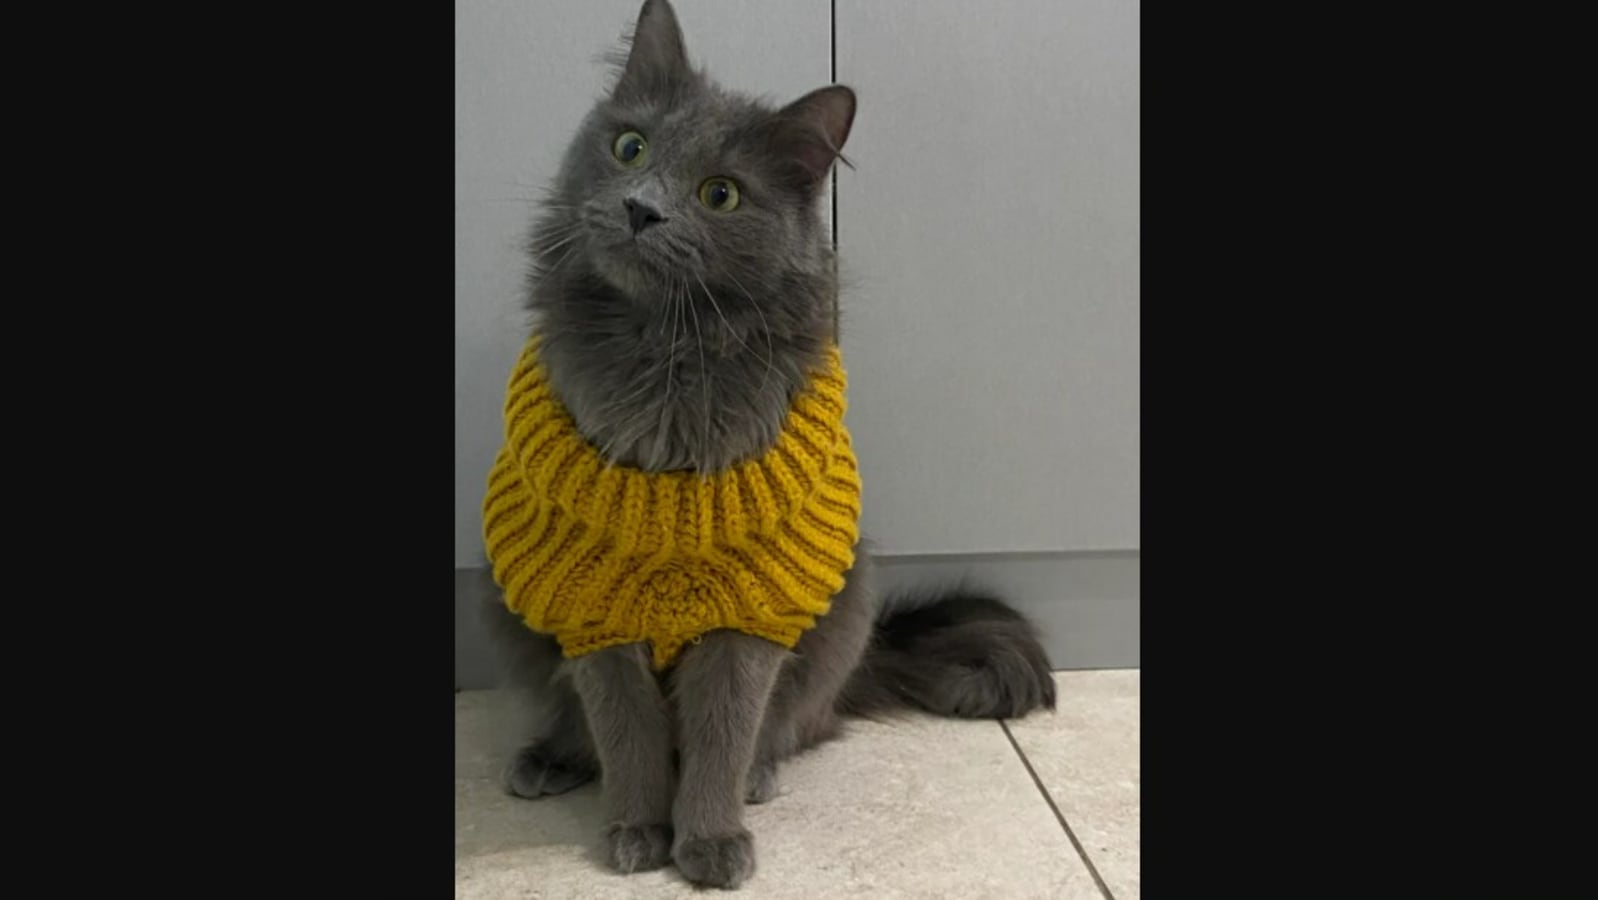 Redditor\'s mom knits sweater for cat, catto looks cute wearing it ...